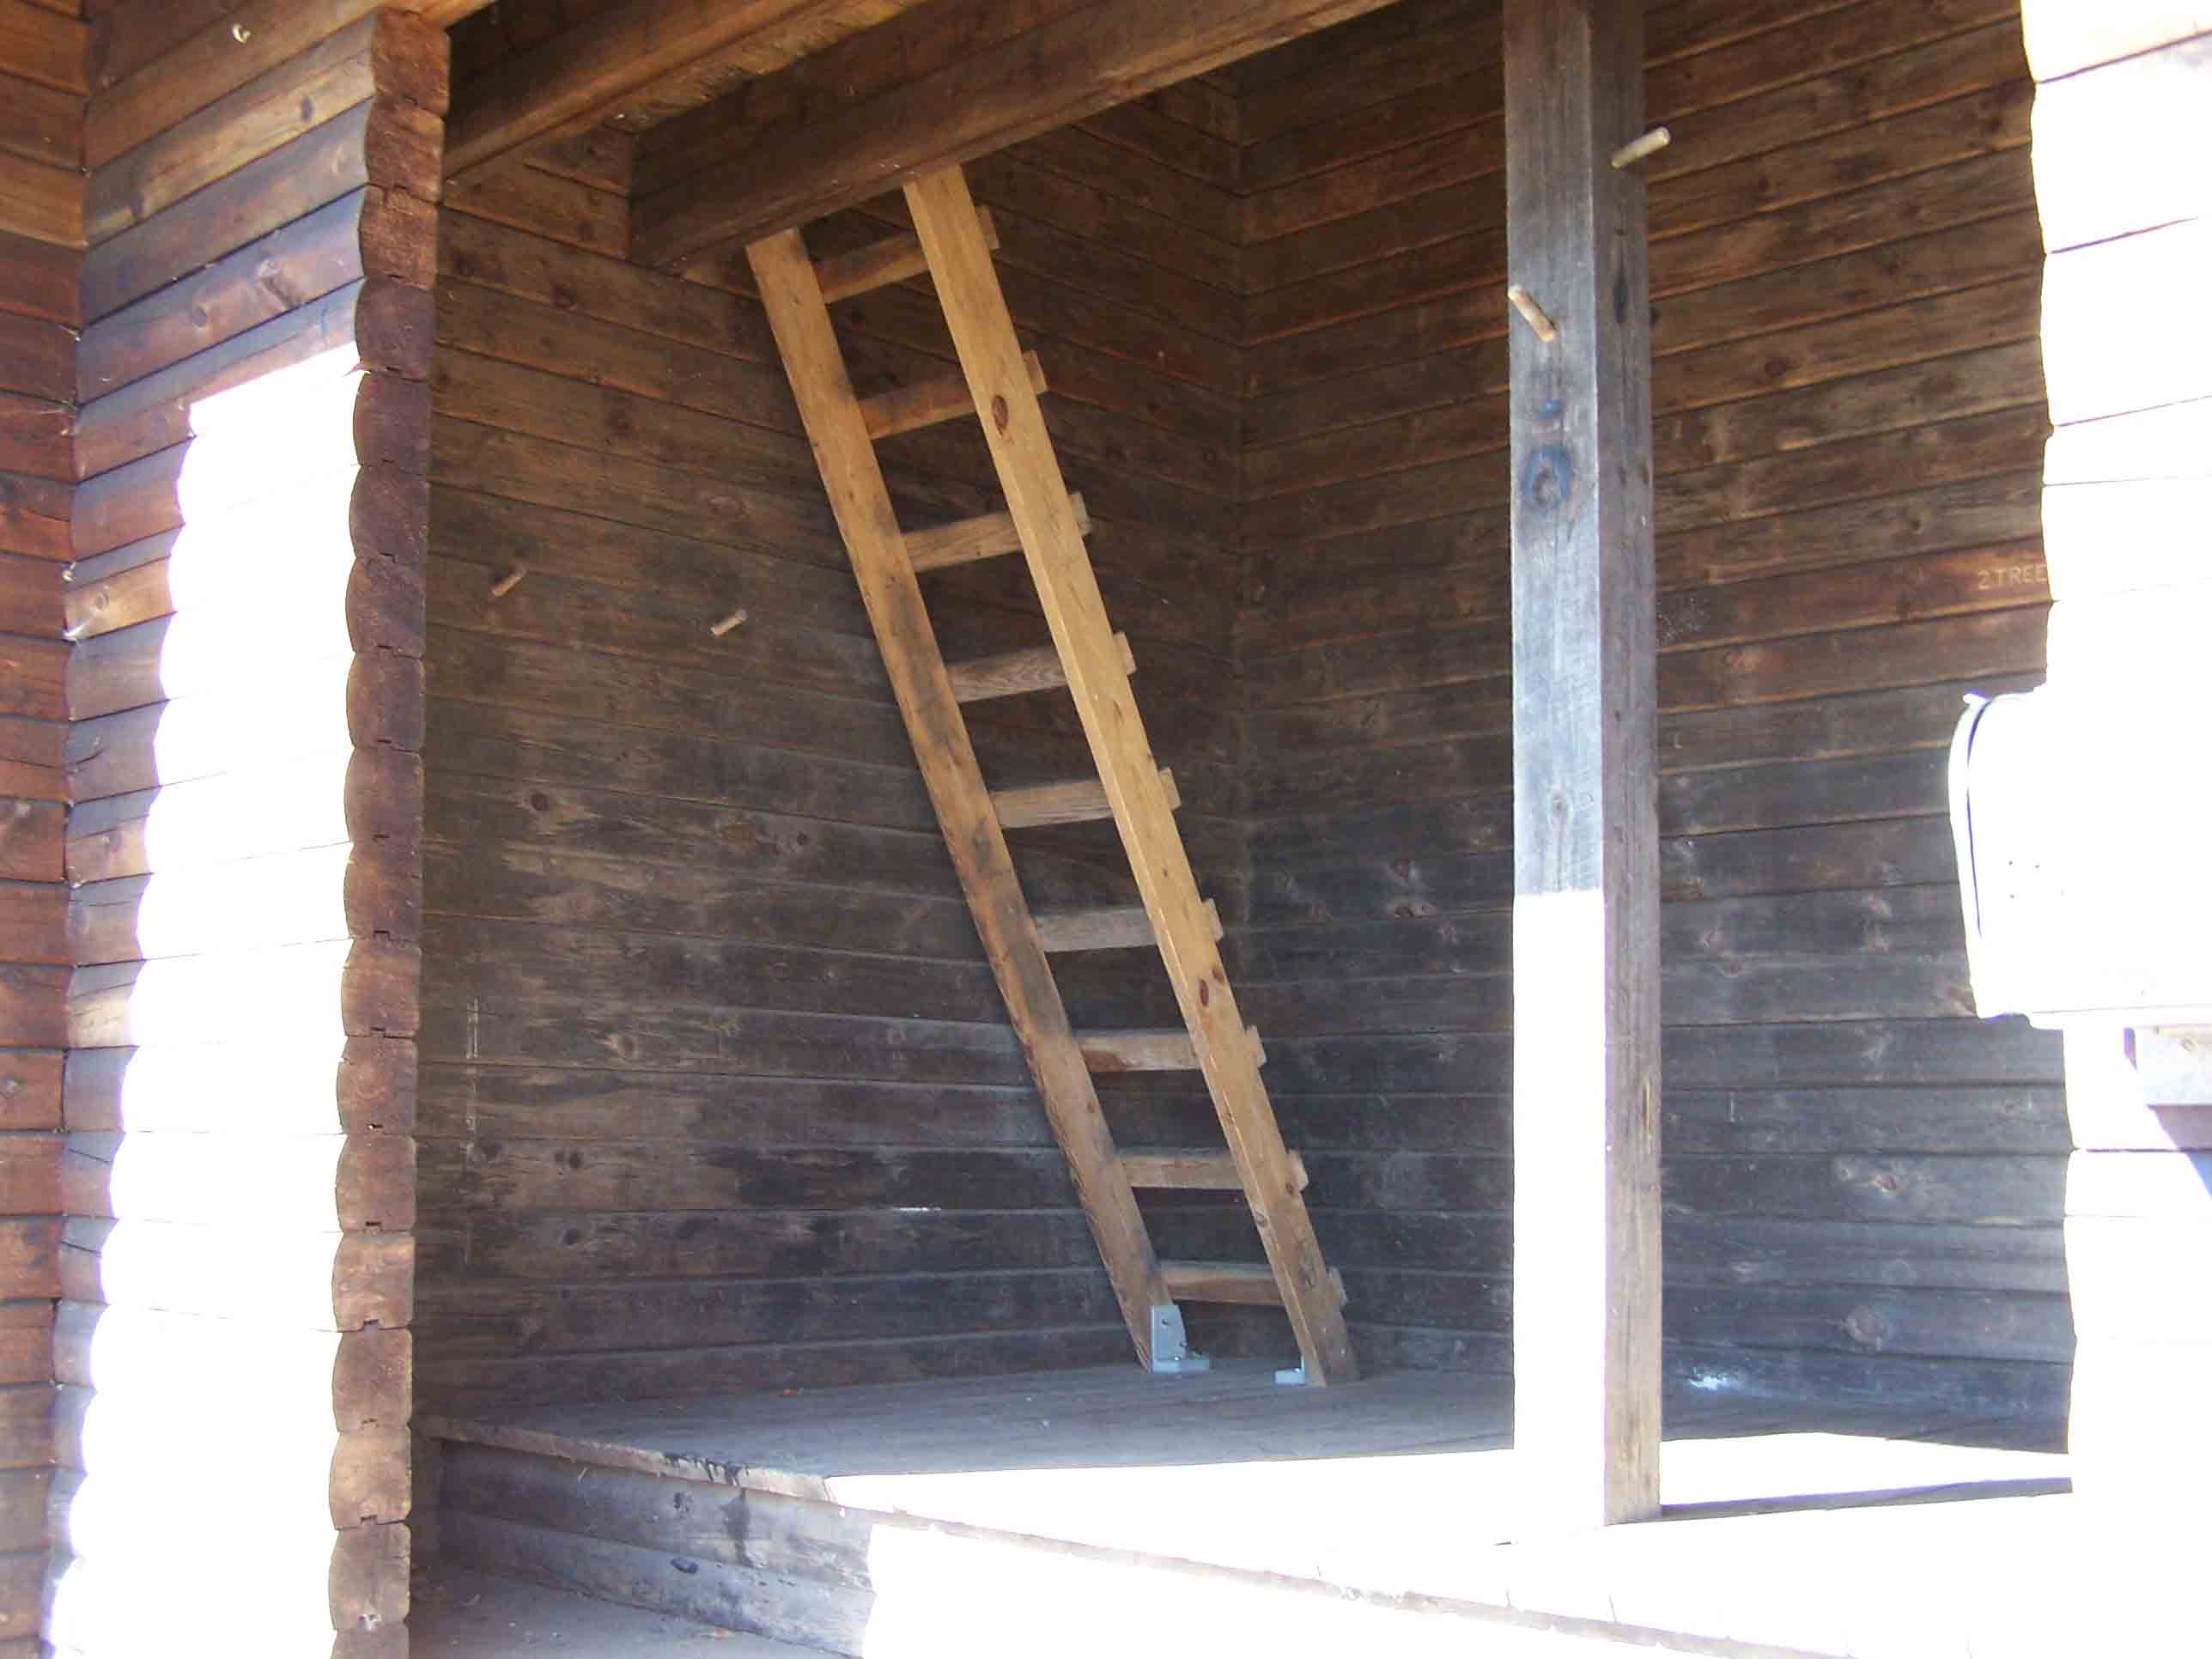 mm 13.4 - Steps to loft of William Penn Shelter. Courtesy at@rohland.org